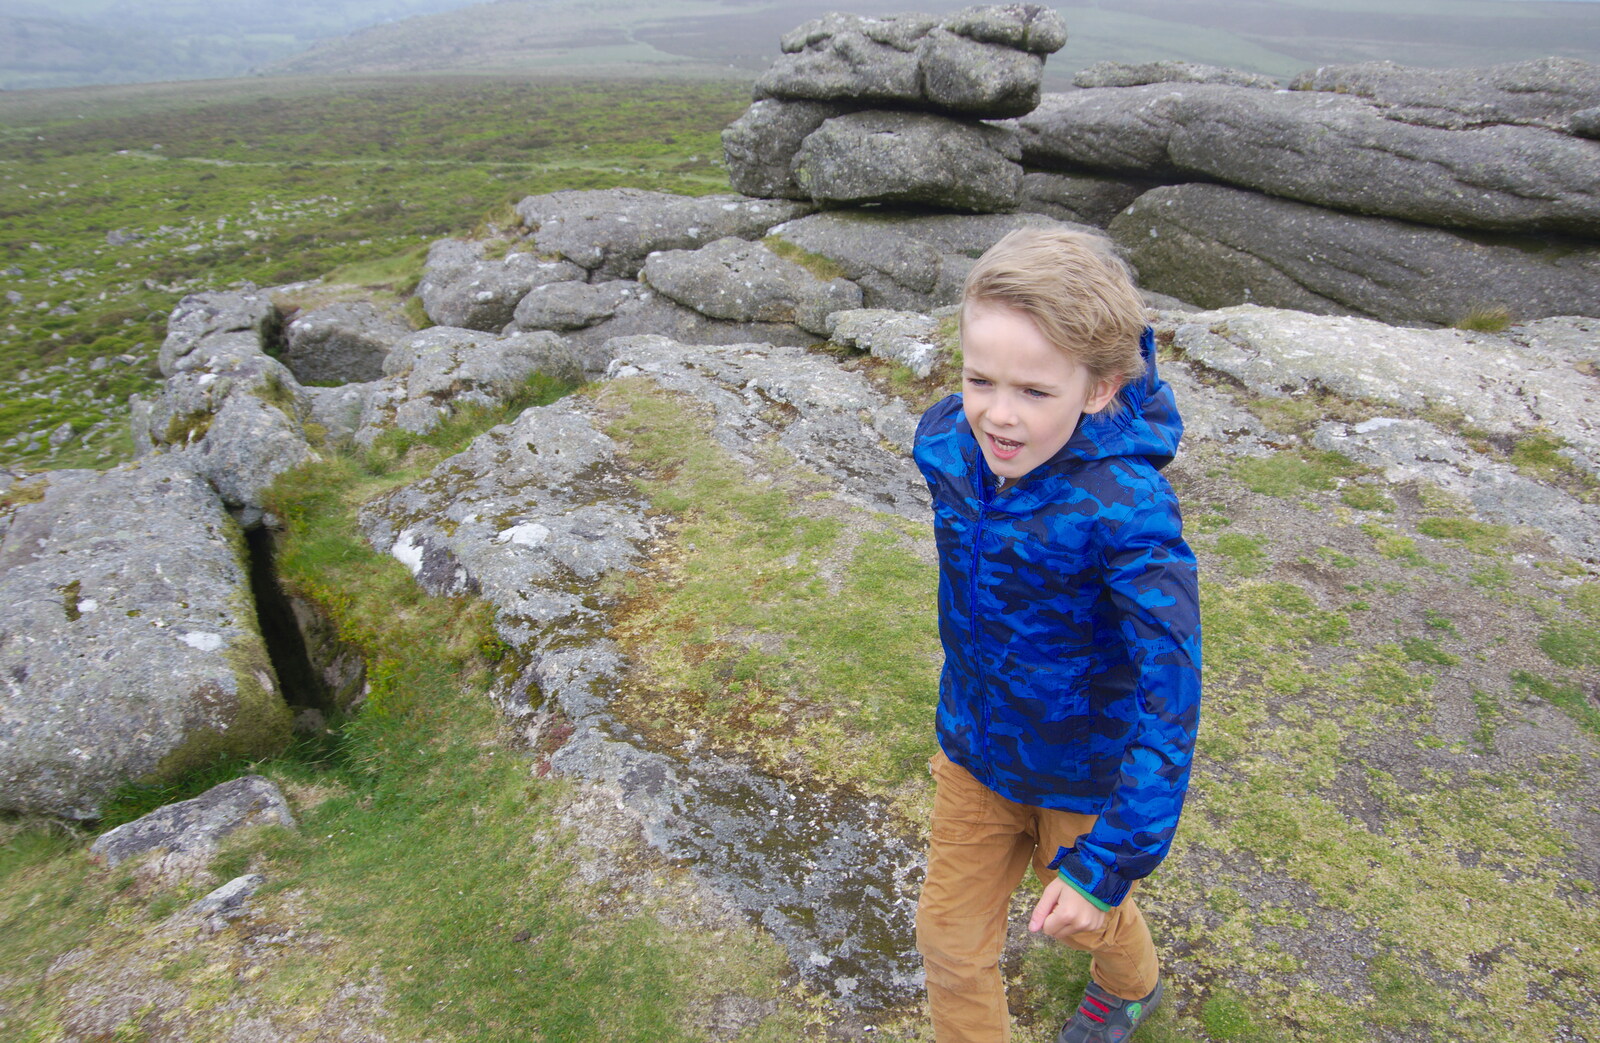 Harry is wind-swept from The Tom Cobley and a Return to Haytor, Bovey Tracey, Devon - 27th May 2019